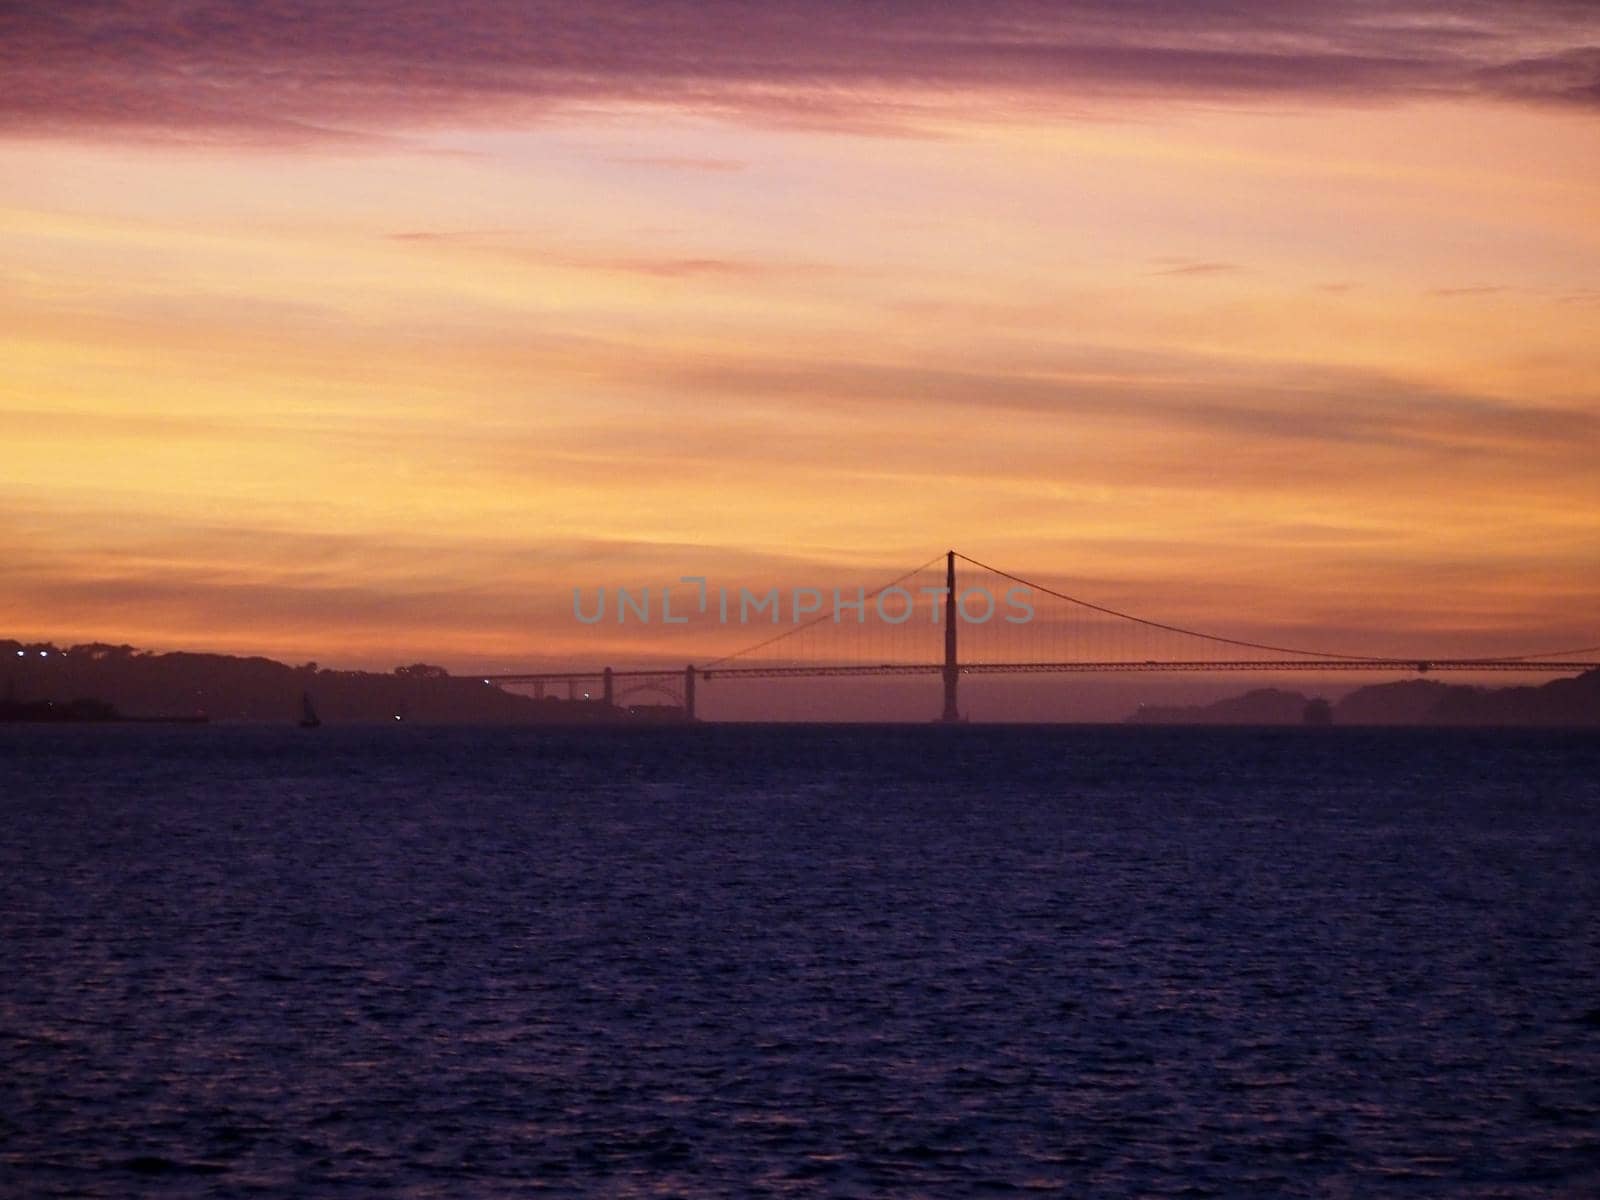 Sunset over San Francisco Bay and the Golden Gate Bridge by EricGBVD